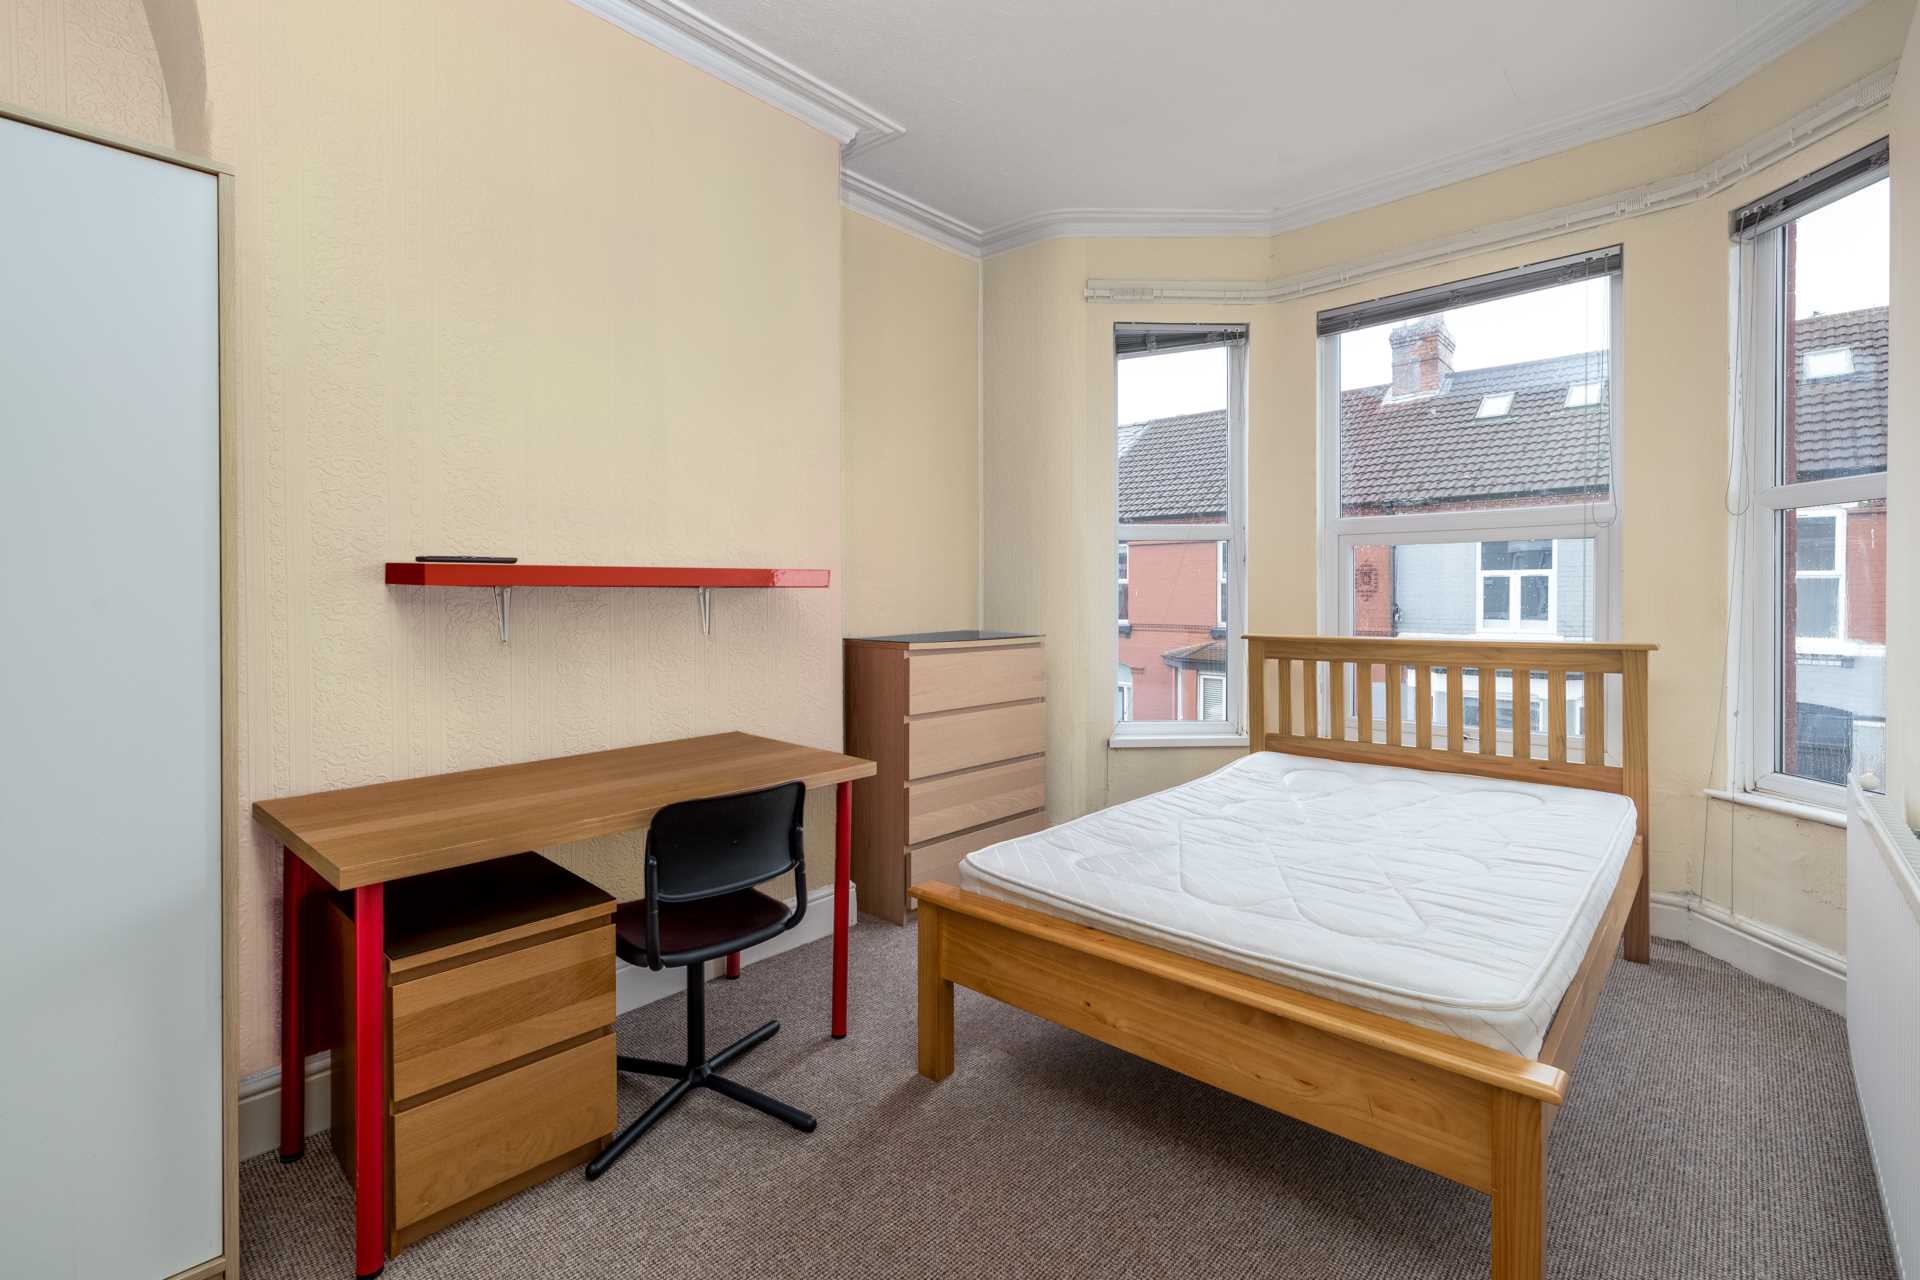 Garmoyle Road, Wavertree - NO DEPOSIT - BILLS INCLUDED - FIRST 3 MONTHS FREE, Image 7